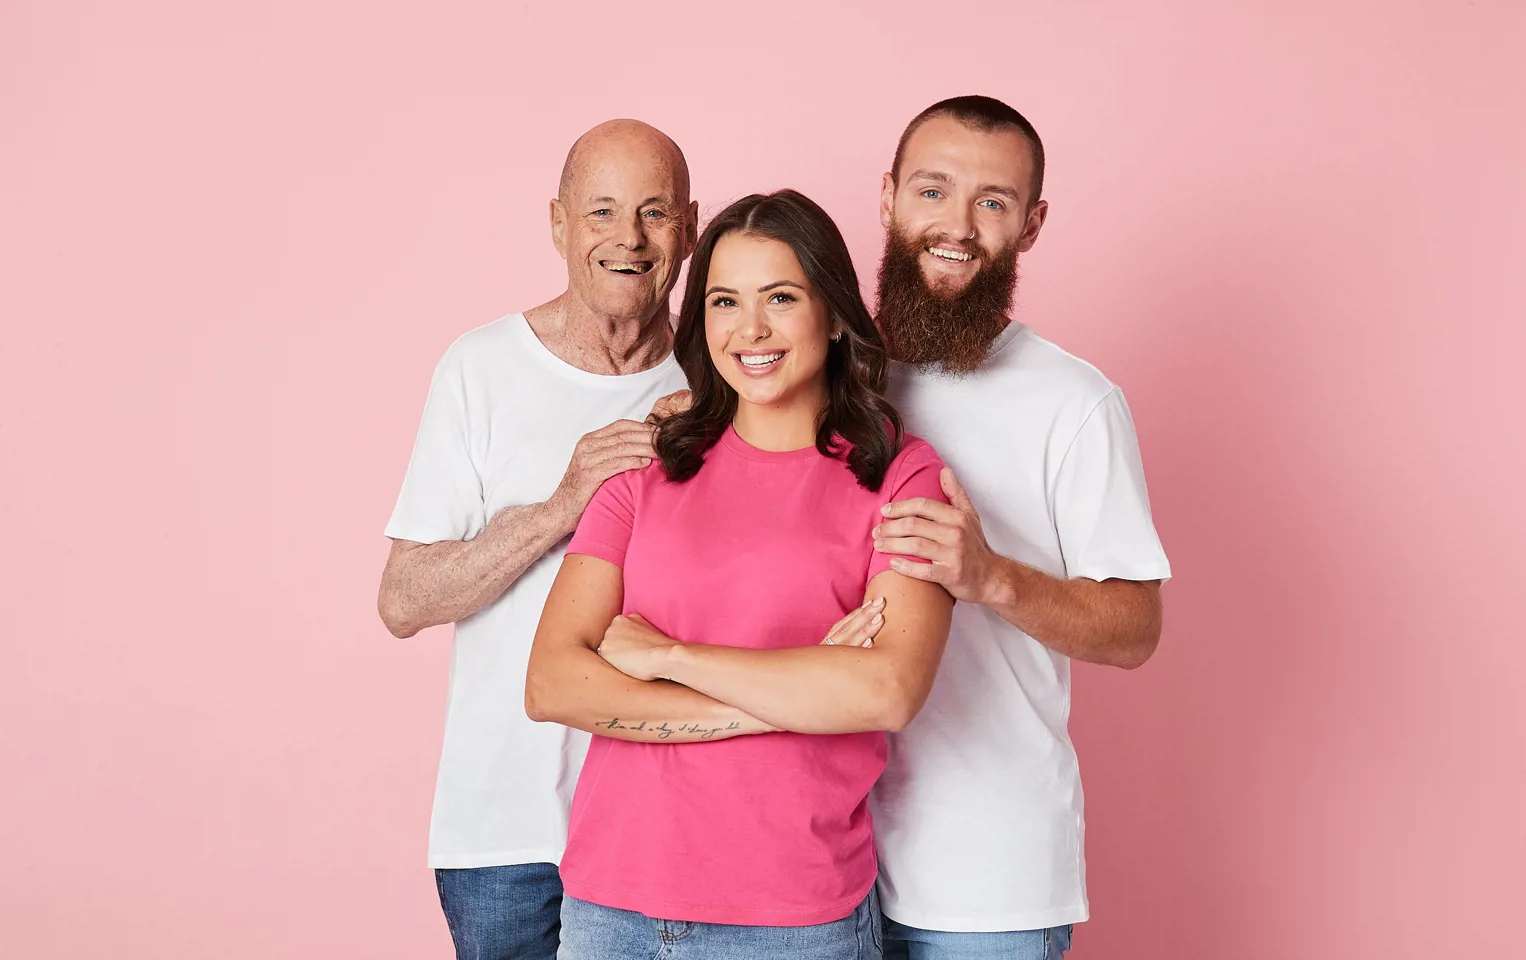 Stephanie wearing a pink top smiling at the camera with her father and partner standing behind her with their hands on her shoulder